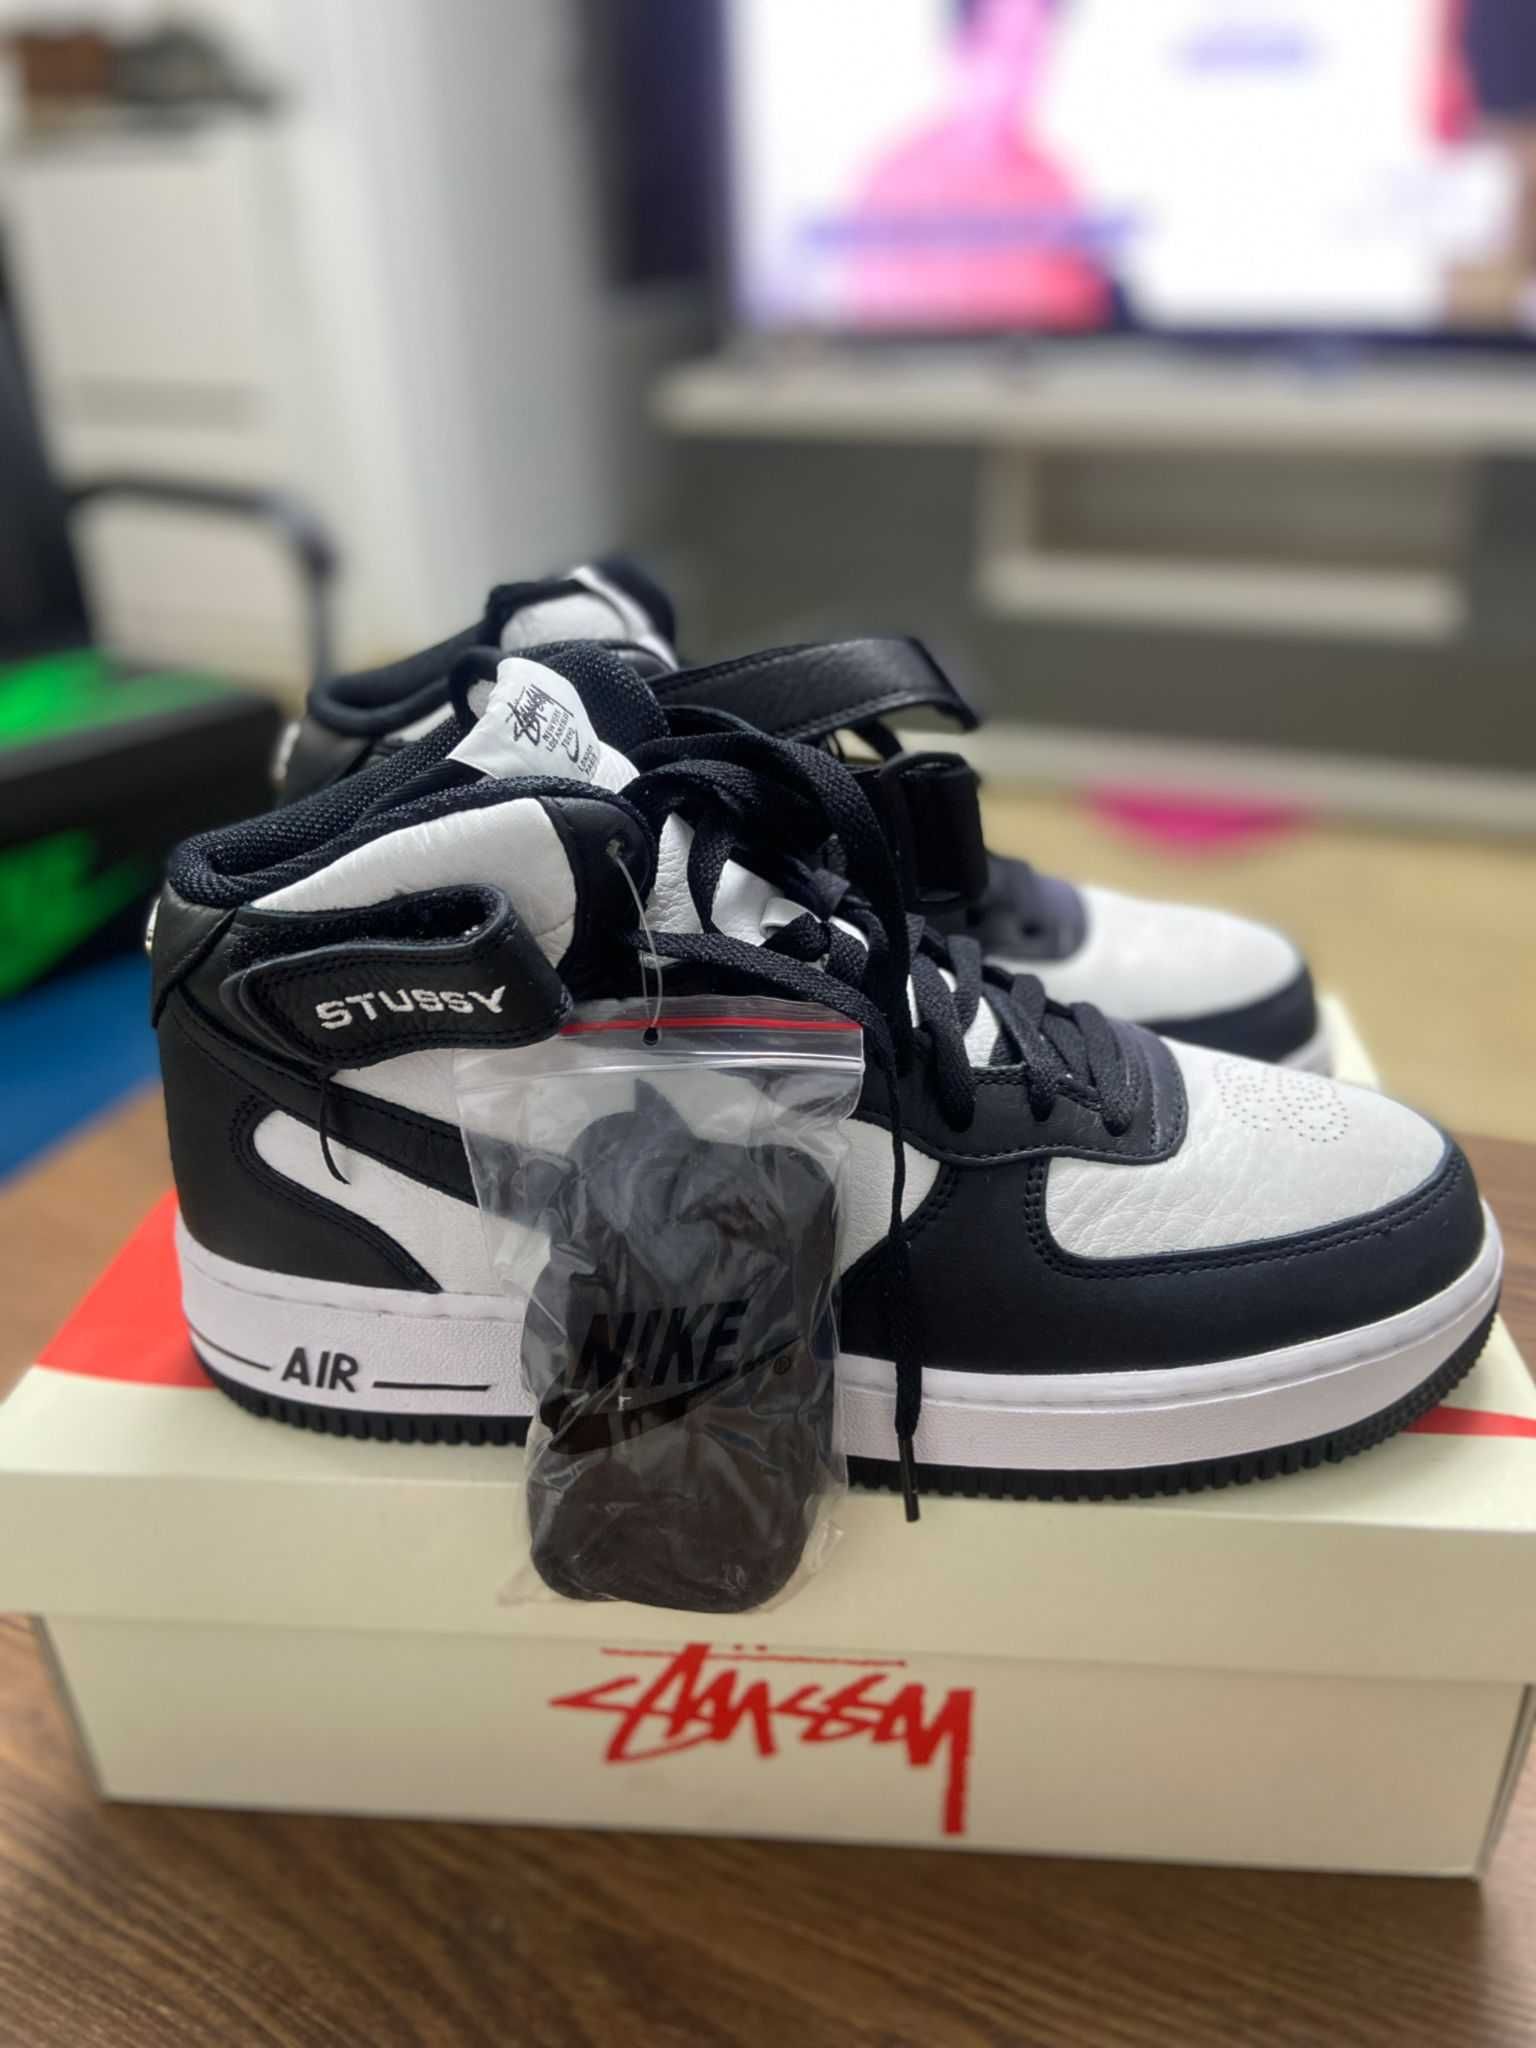 Stussy x Nike Air force 1 / new / size : 43